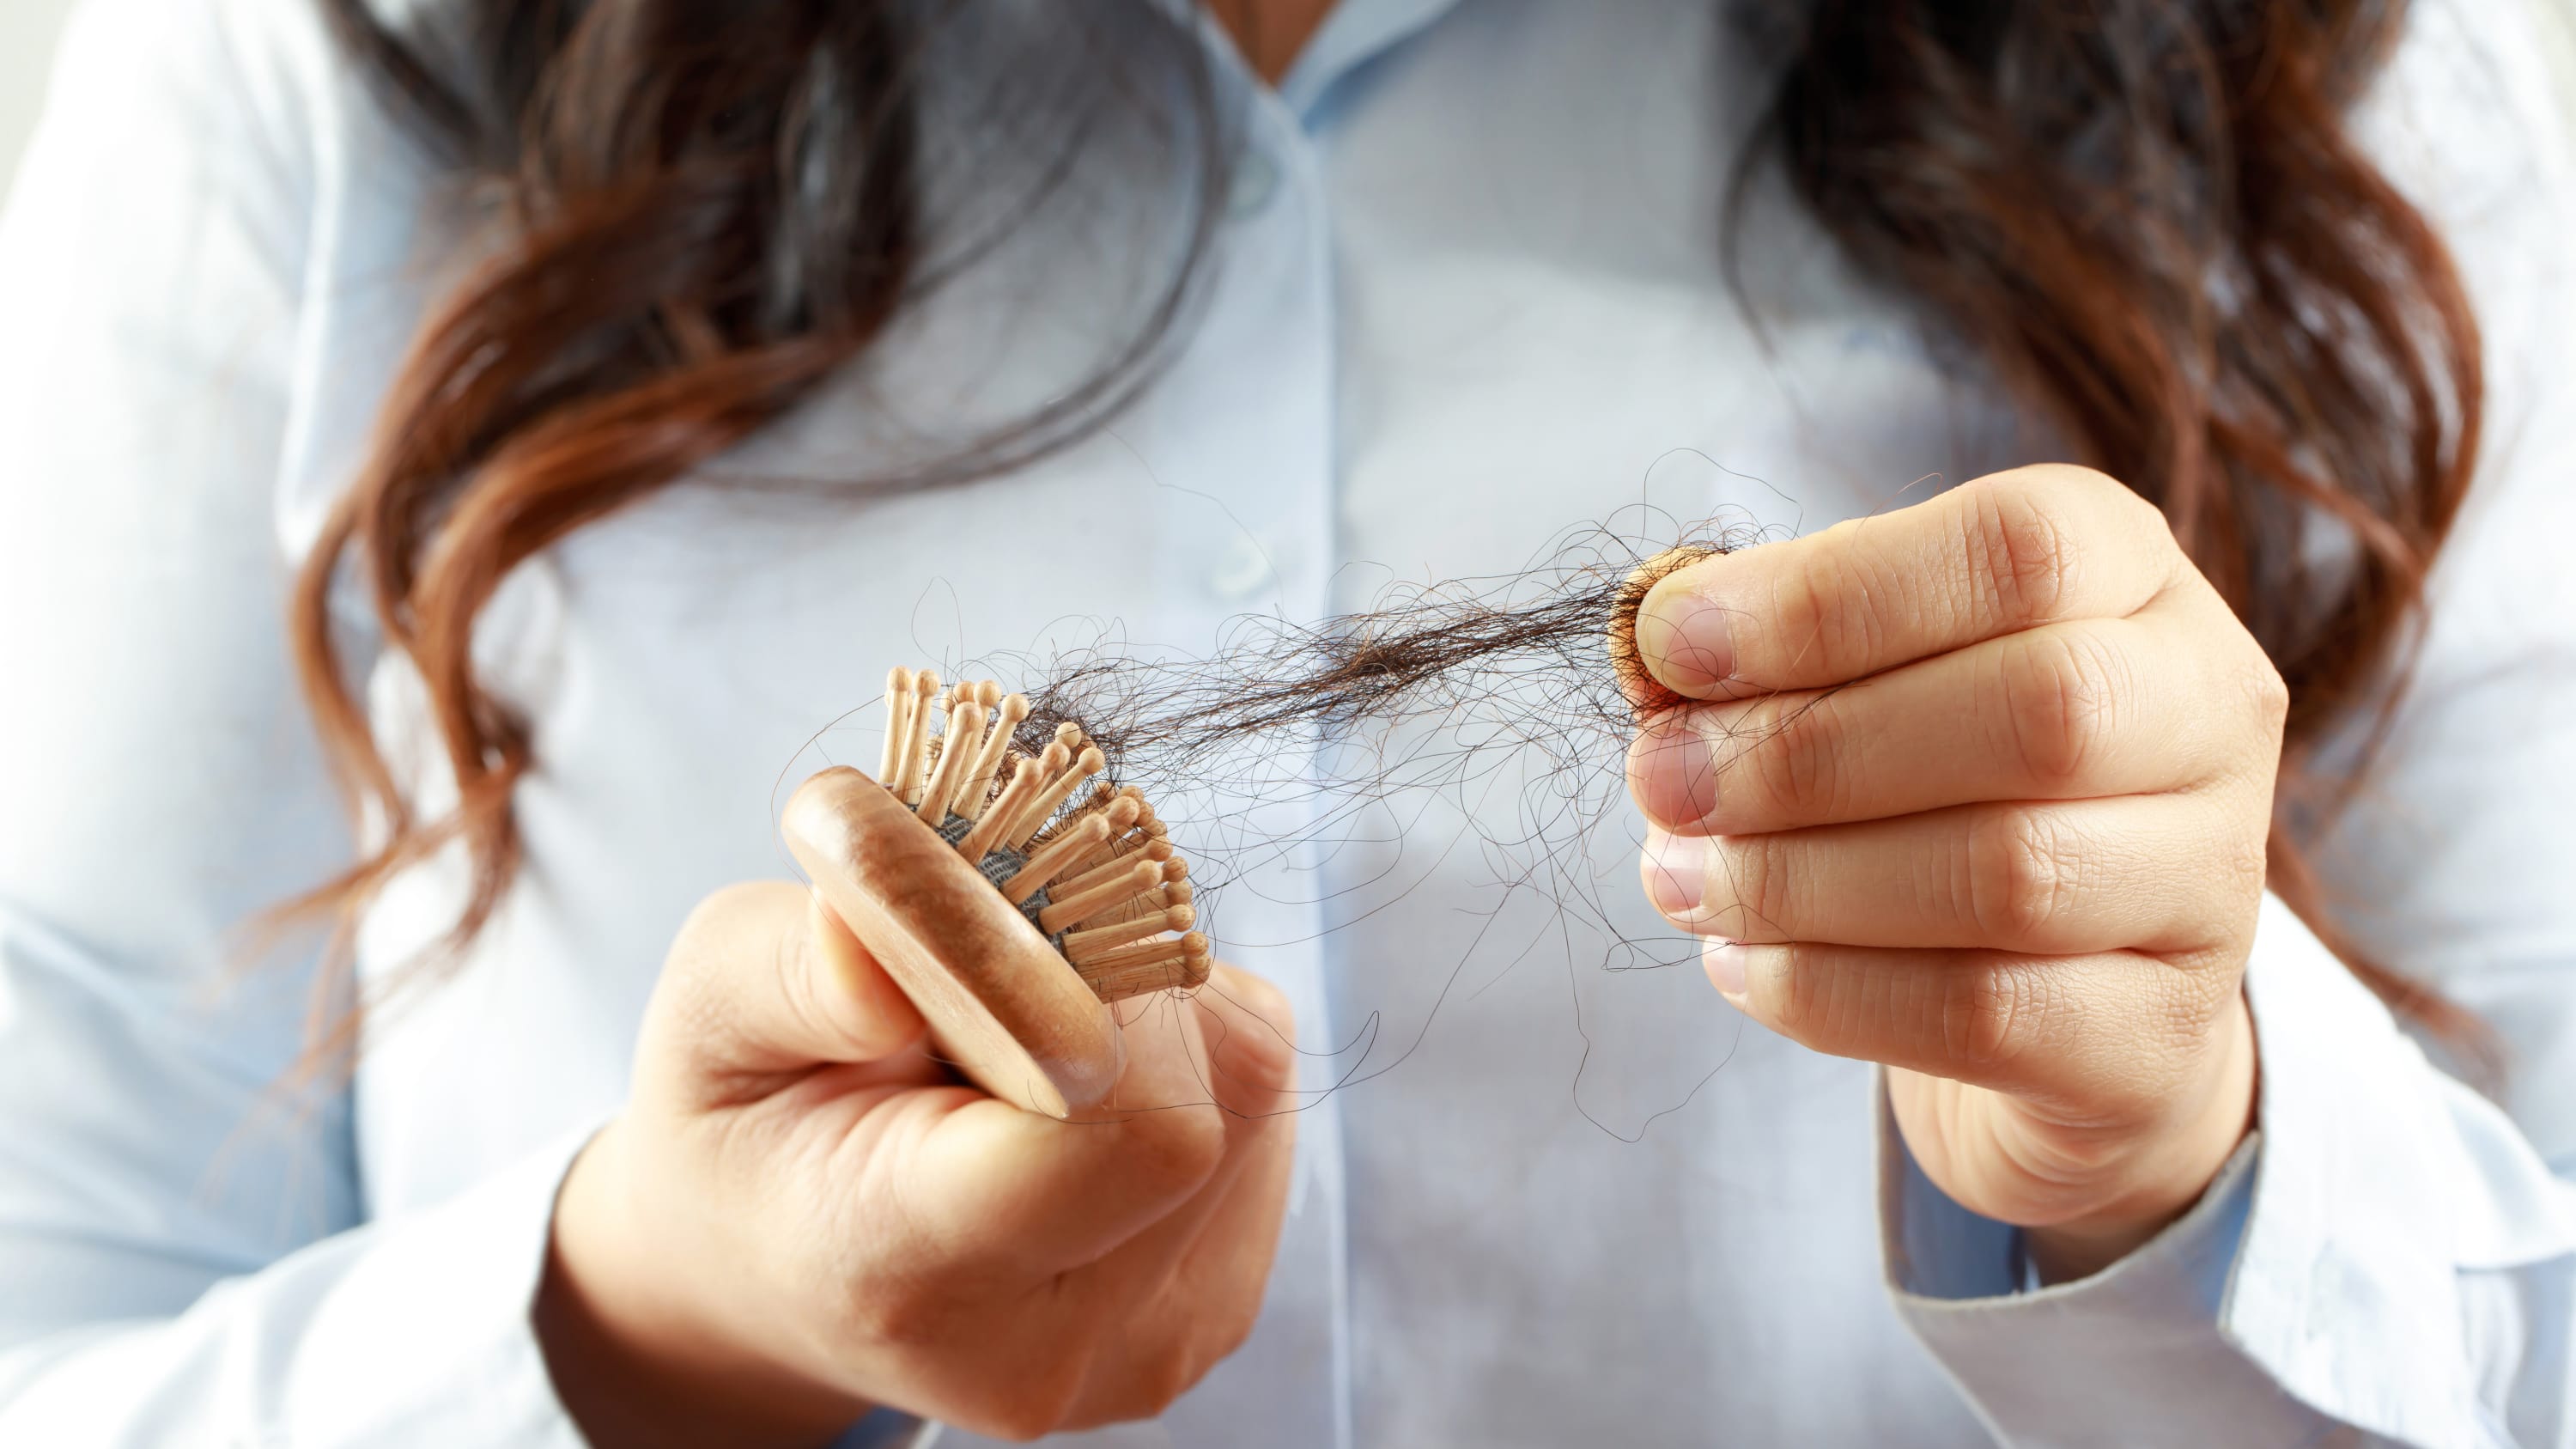 woman holding brush with hair on it, representing hair loss from alopecia areata